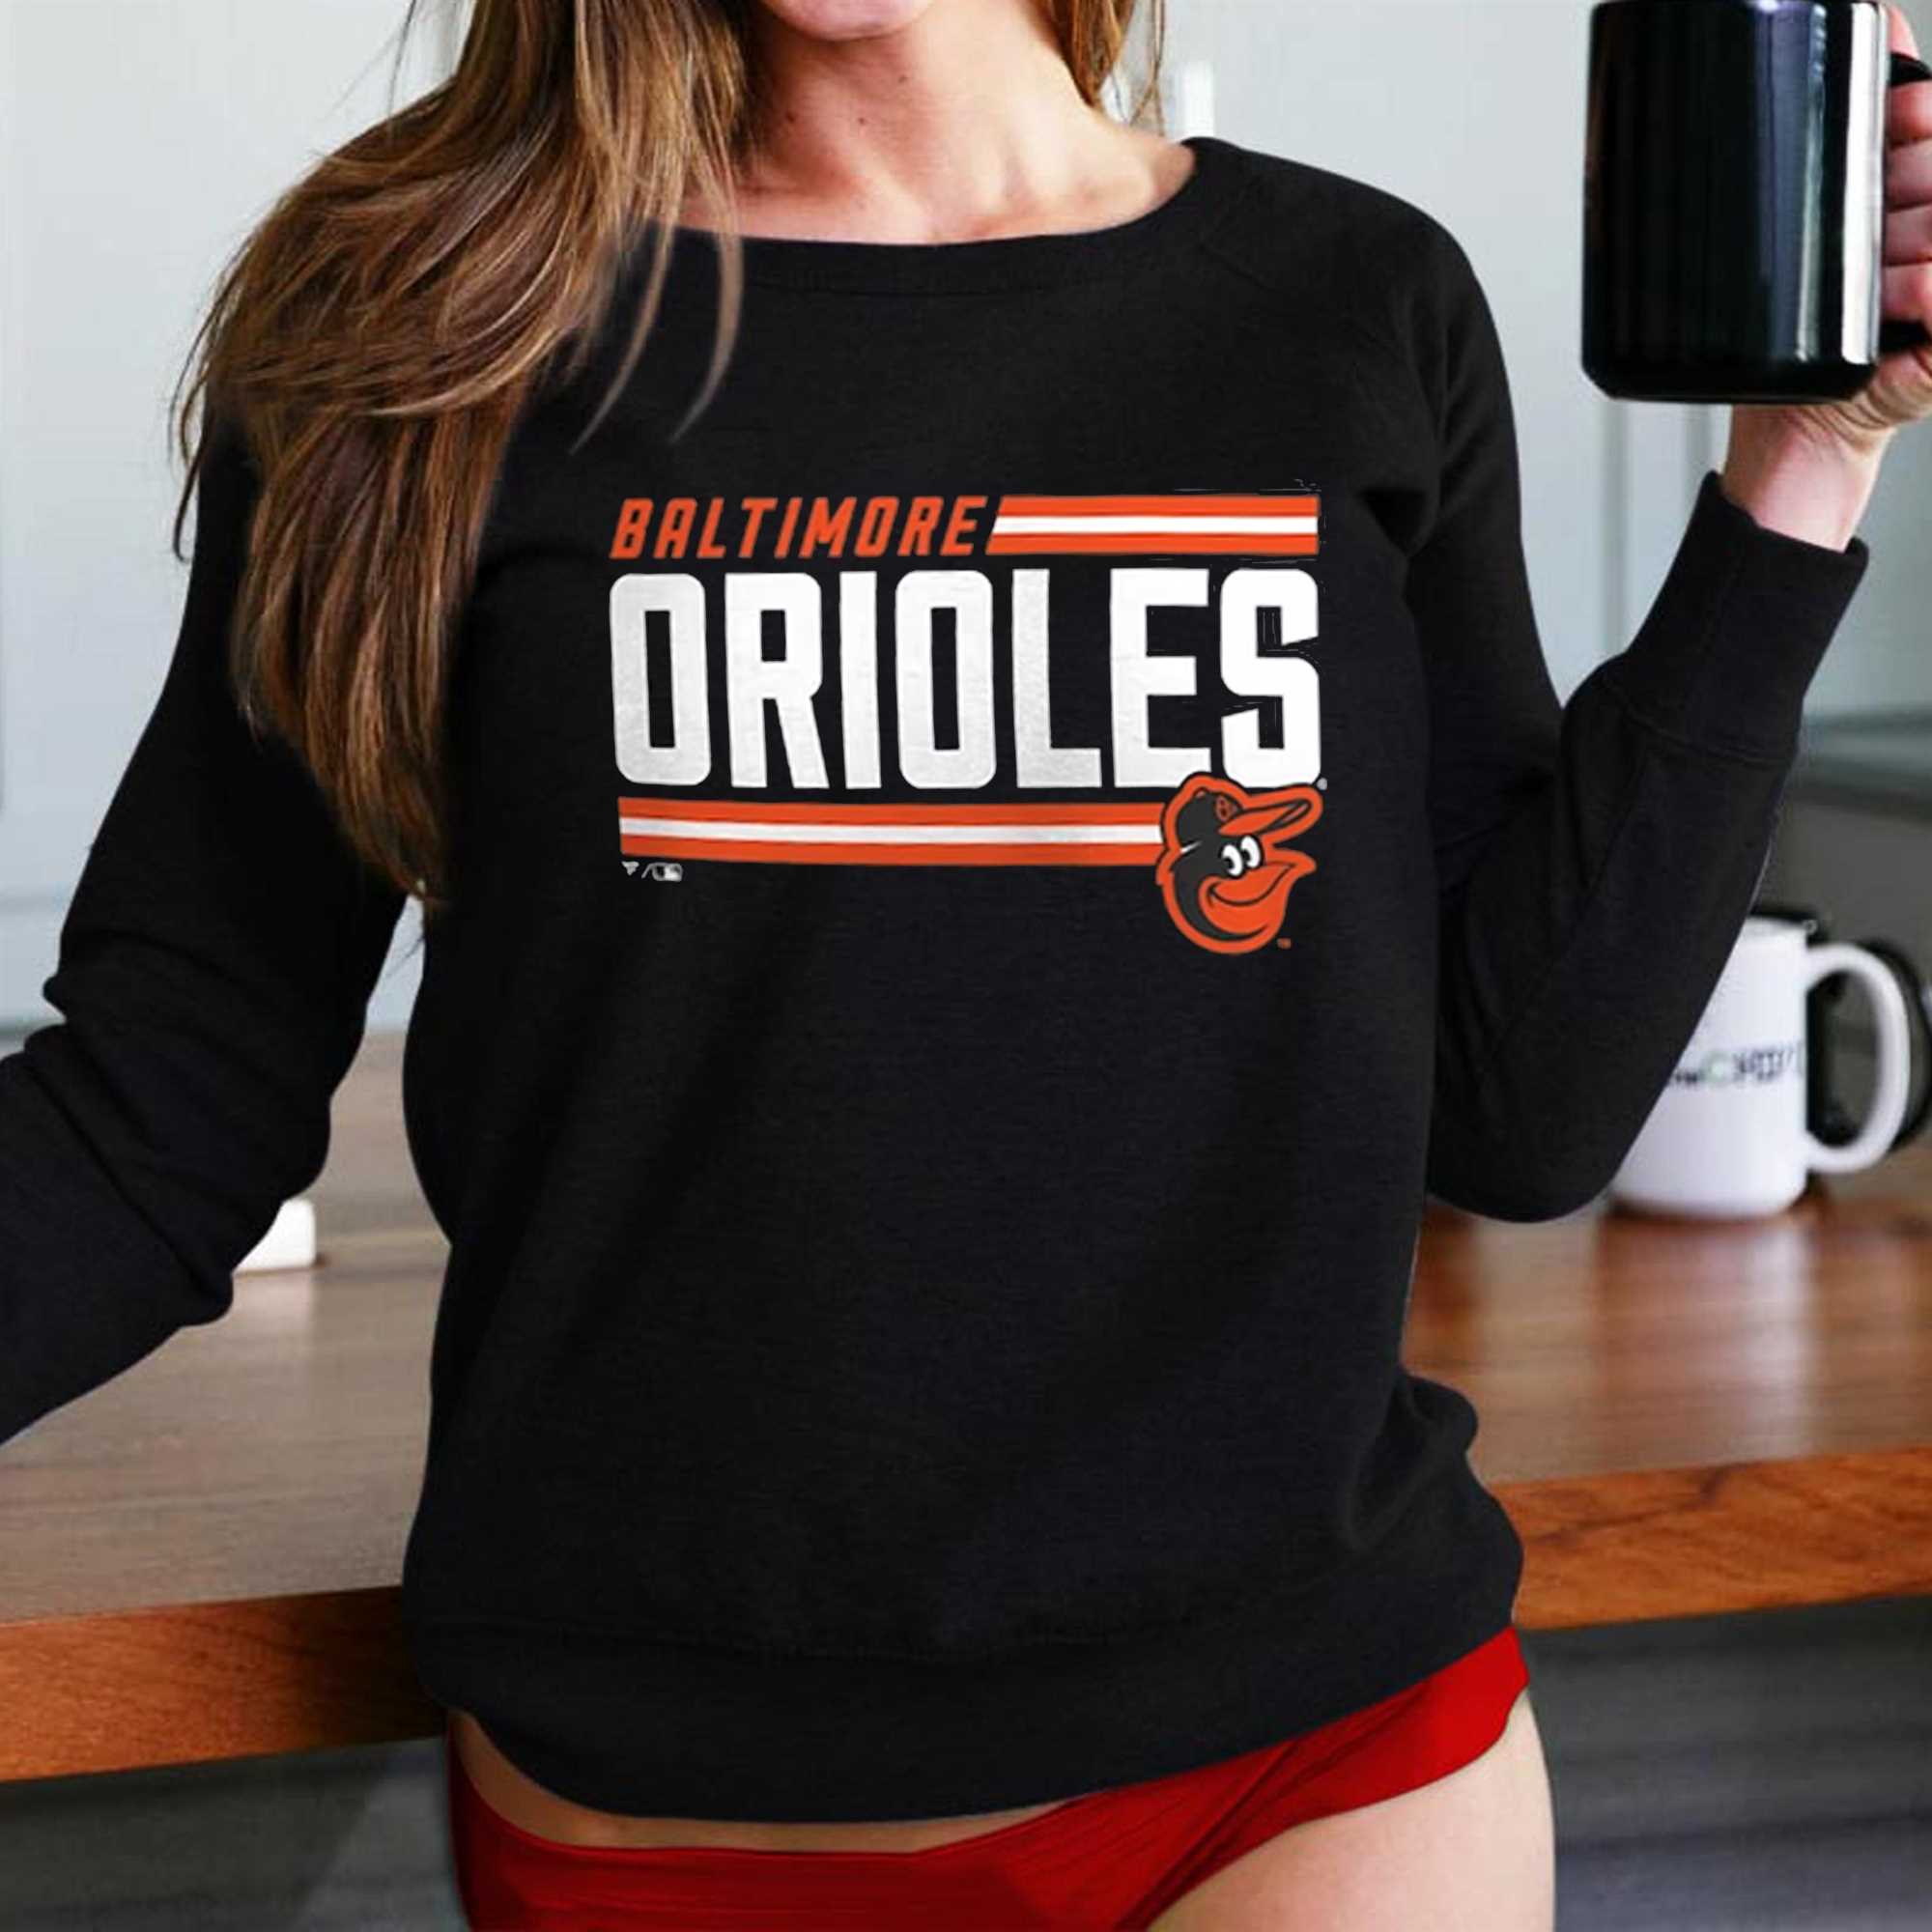 baltimore orioles long sleeve t shirts